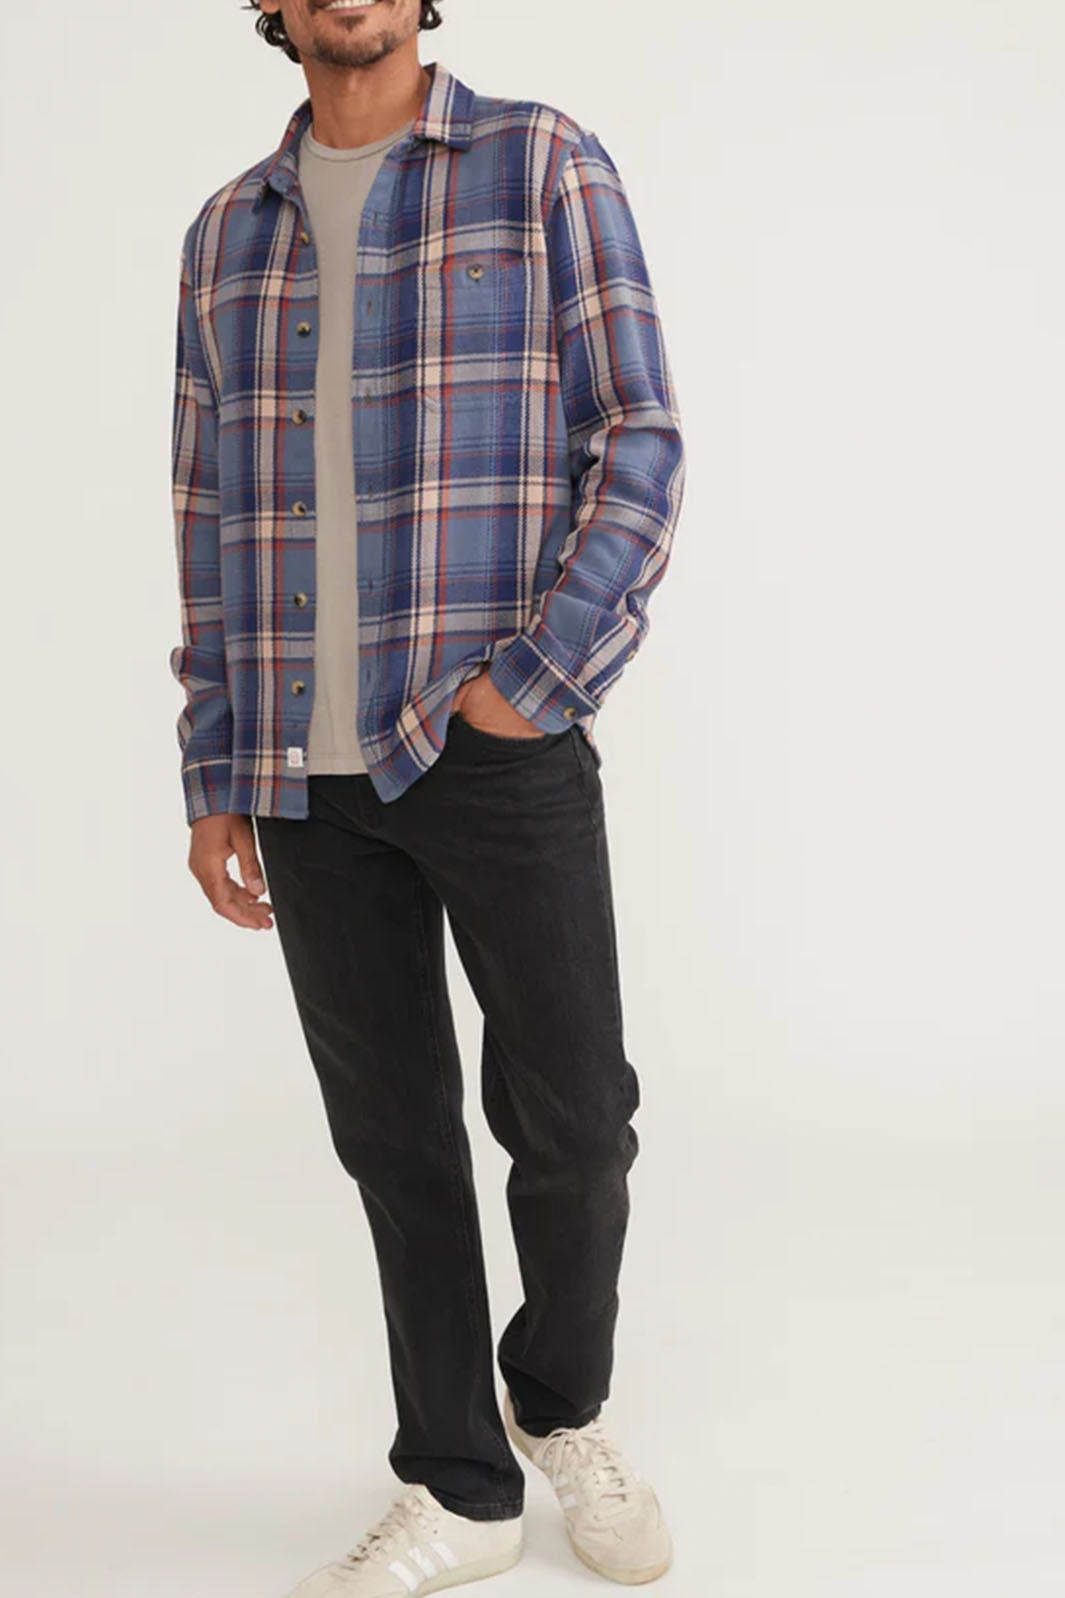 Cole Textured Twill Button-Up - Large Blue Plaid